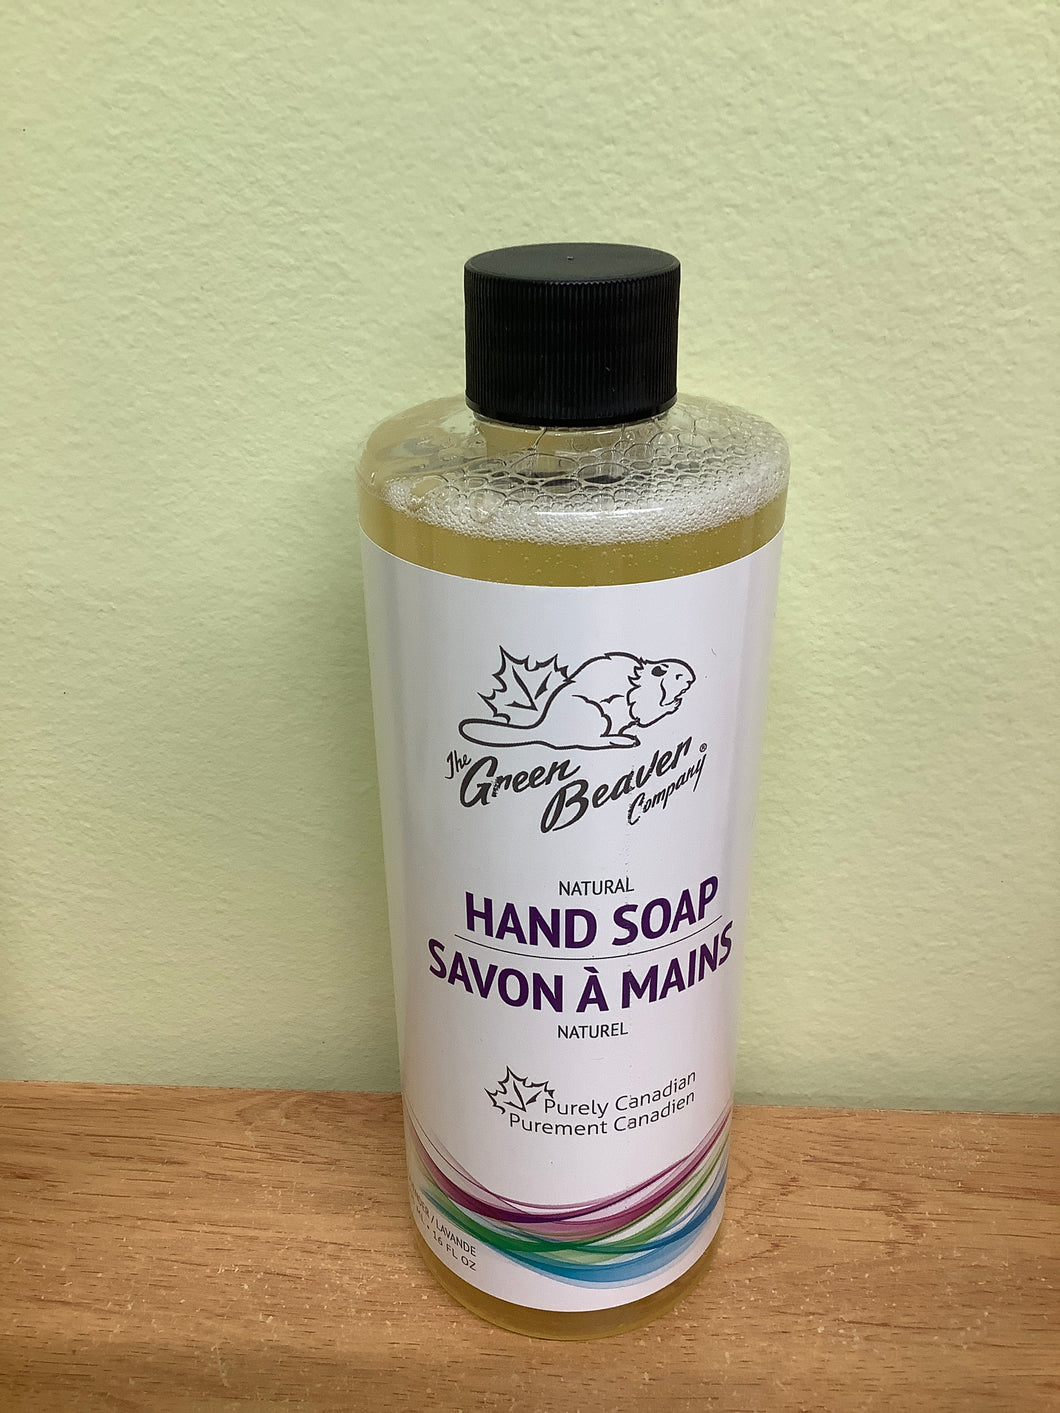 The Green Beaver Co. Natural Hand Soap